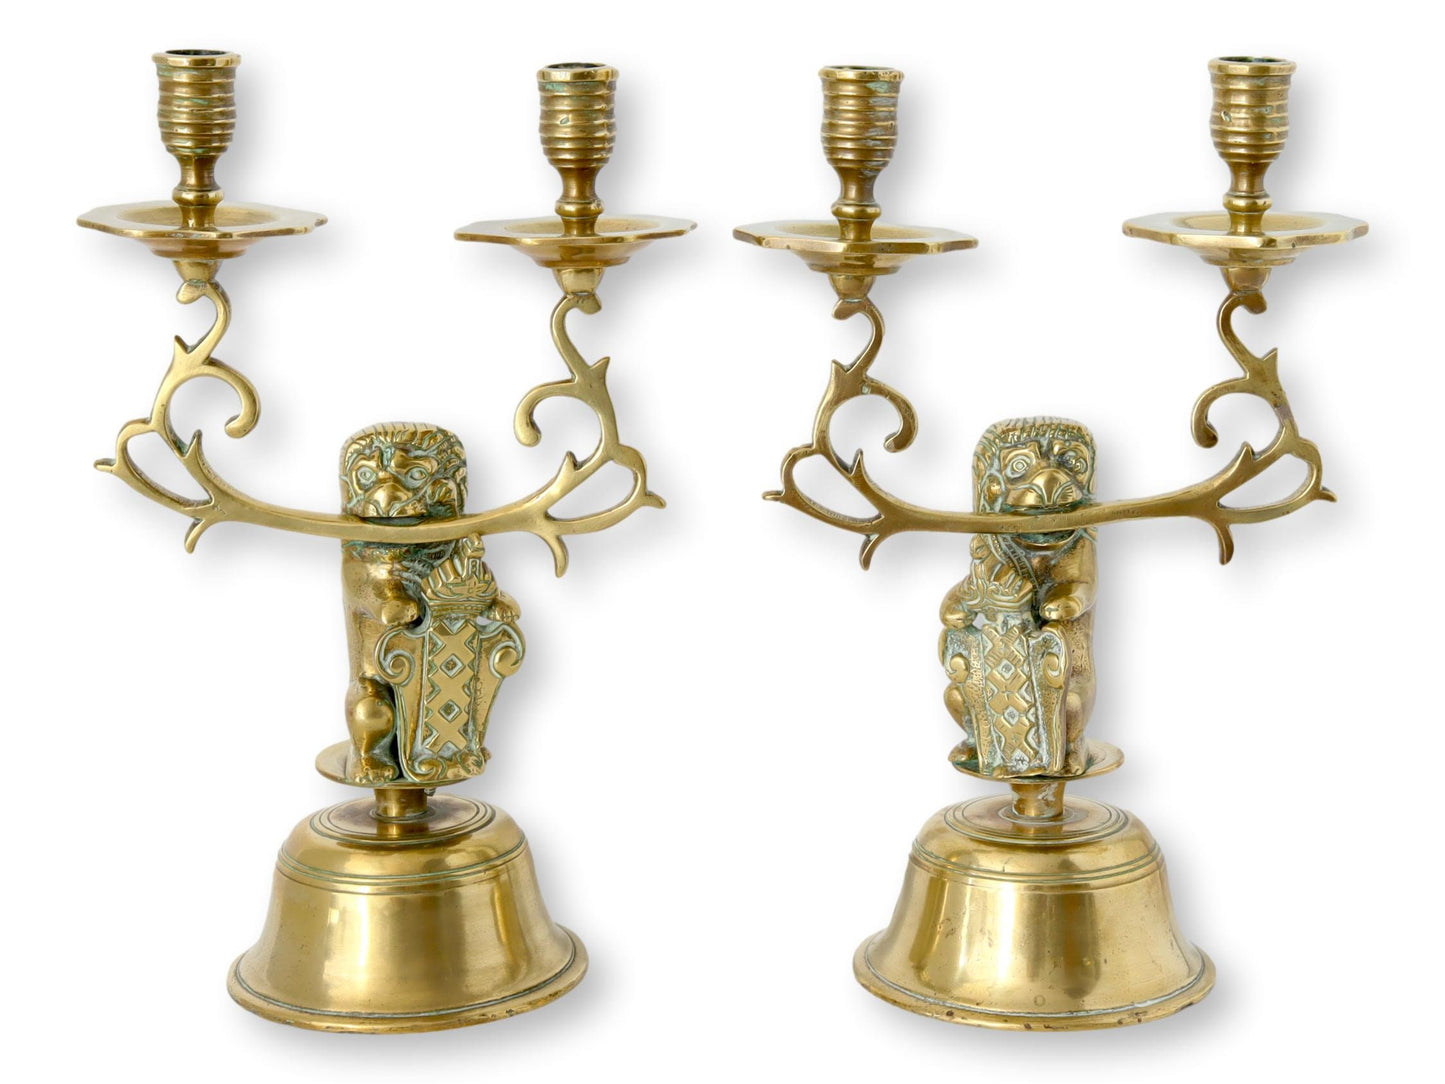 Amsterdam Lion Coat of Arms Candelabras